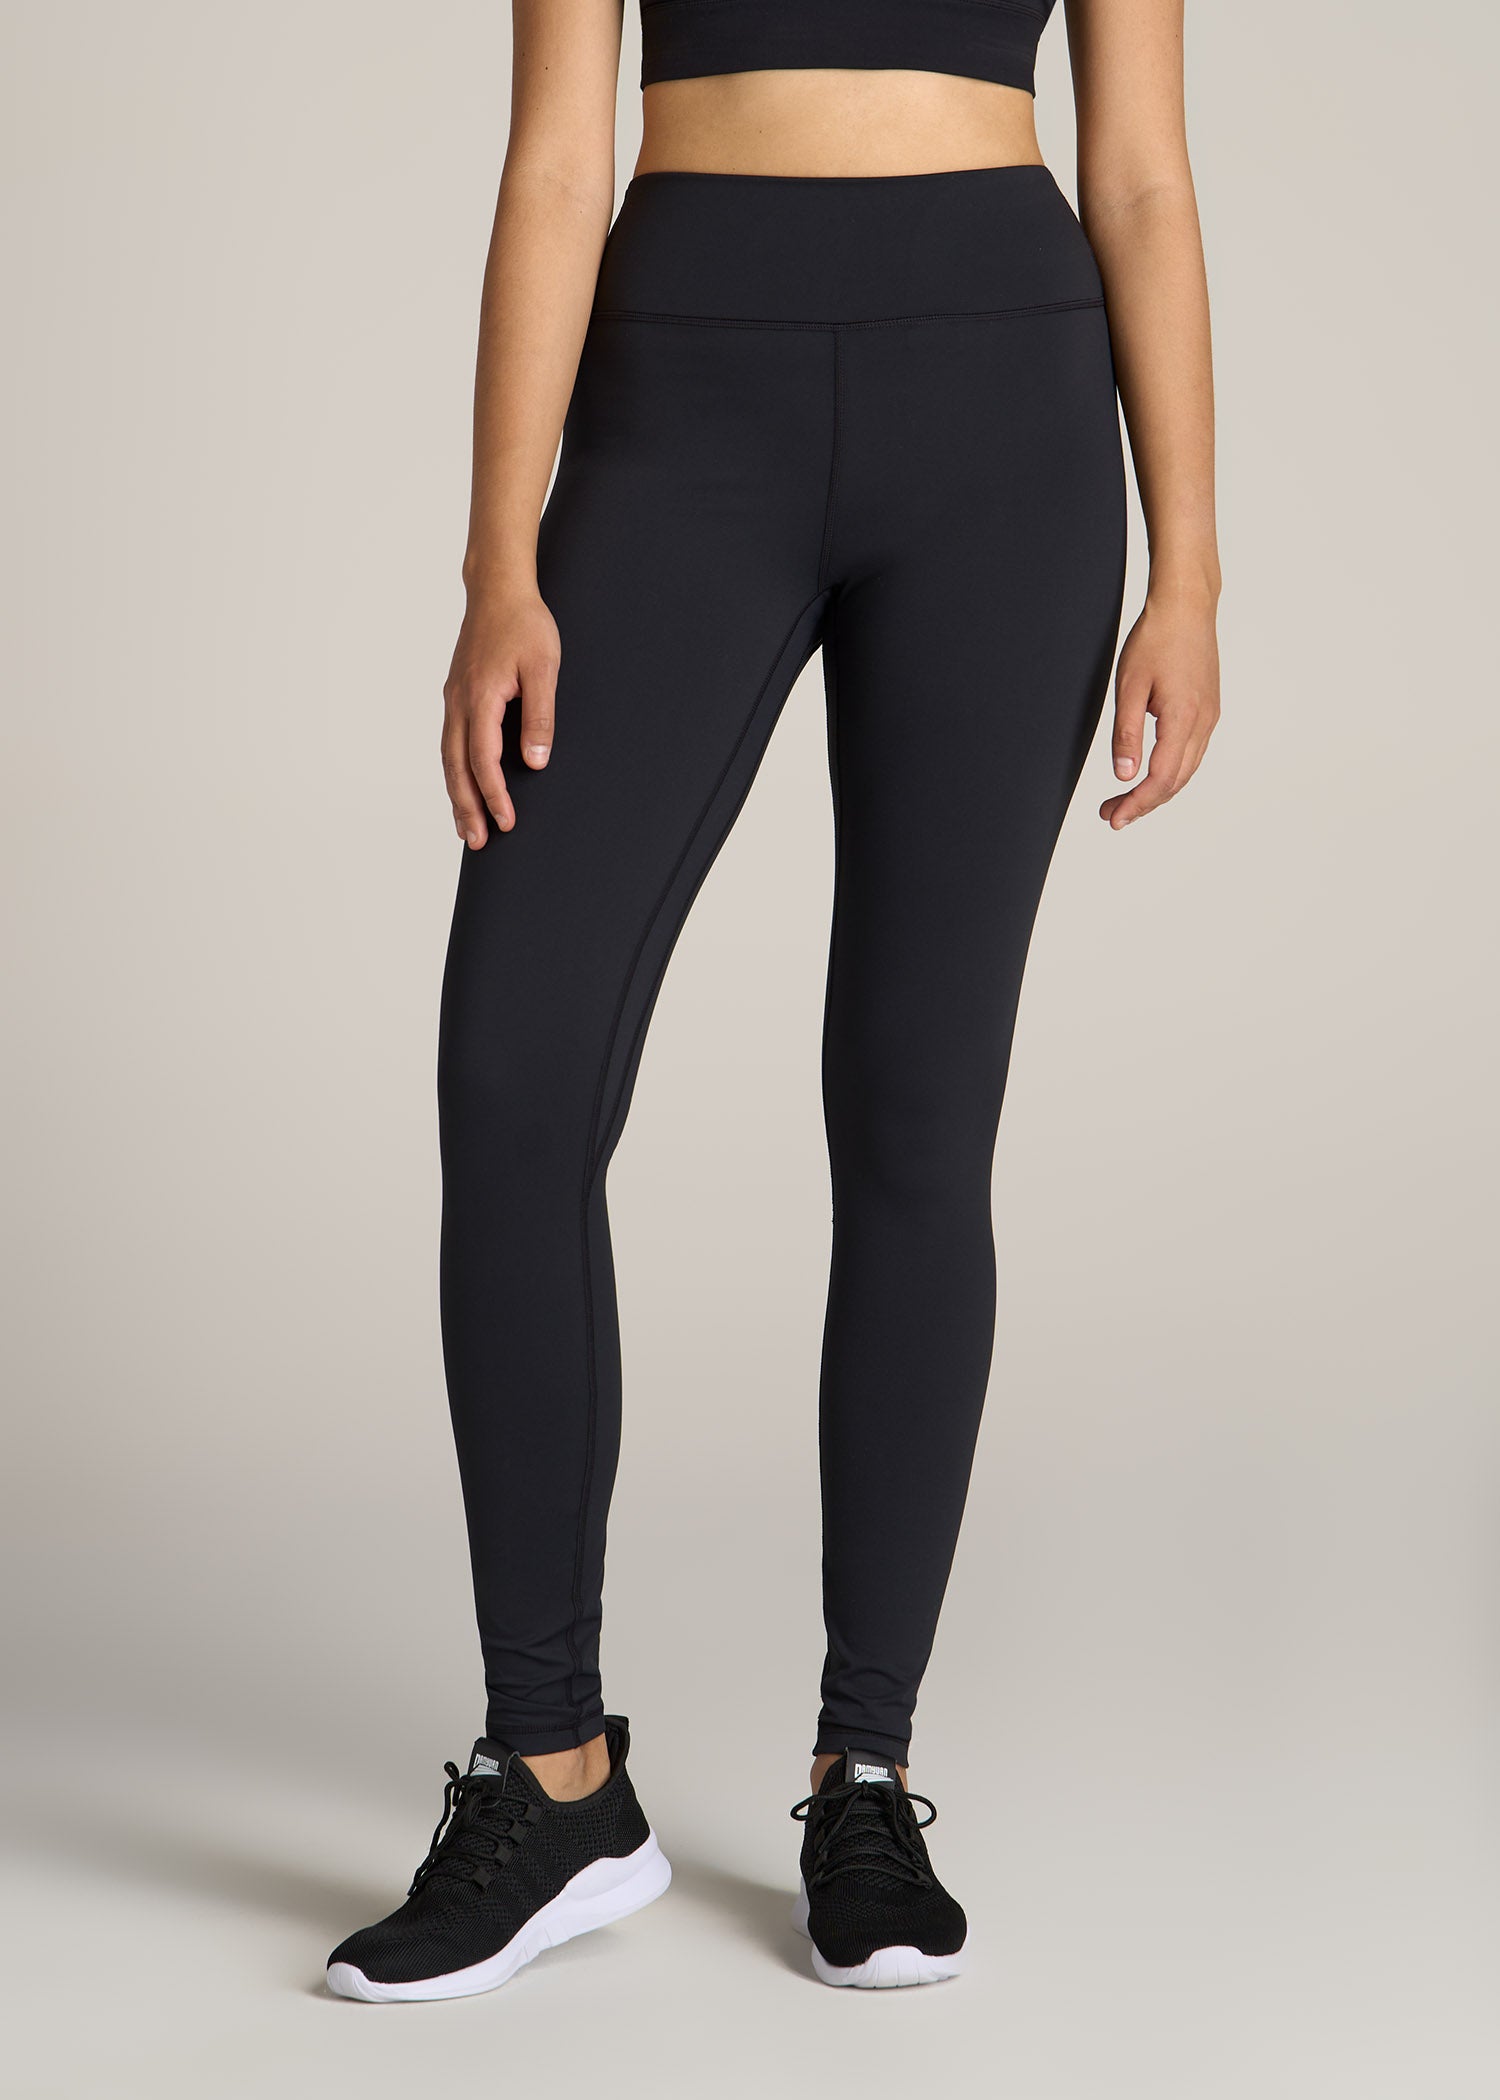 Movement High Rise Cheeky Leggings for Tall Women in Black